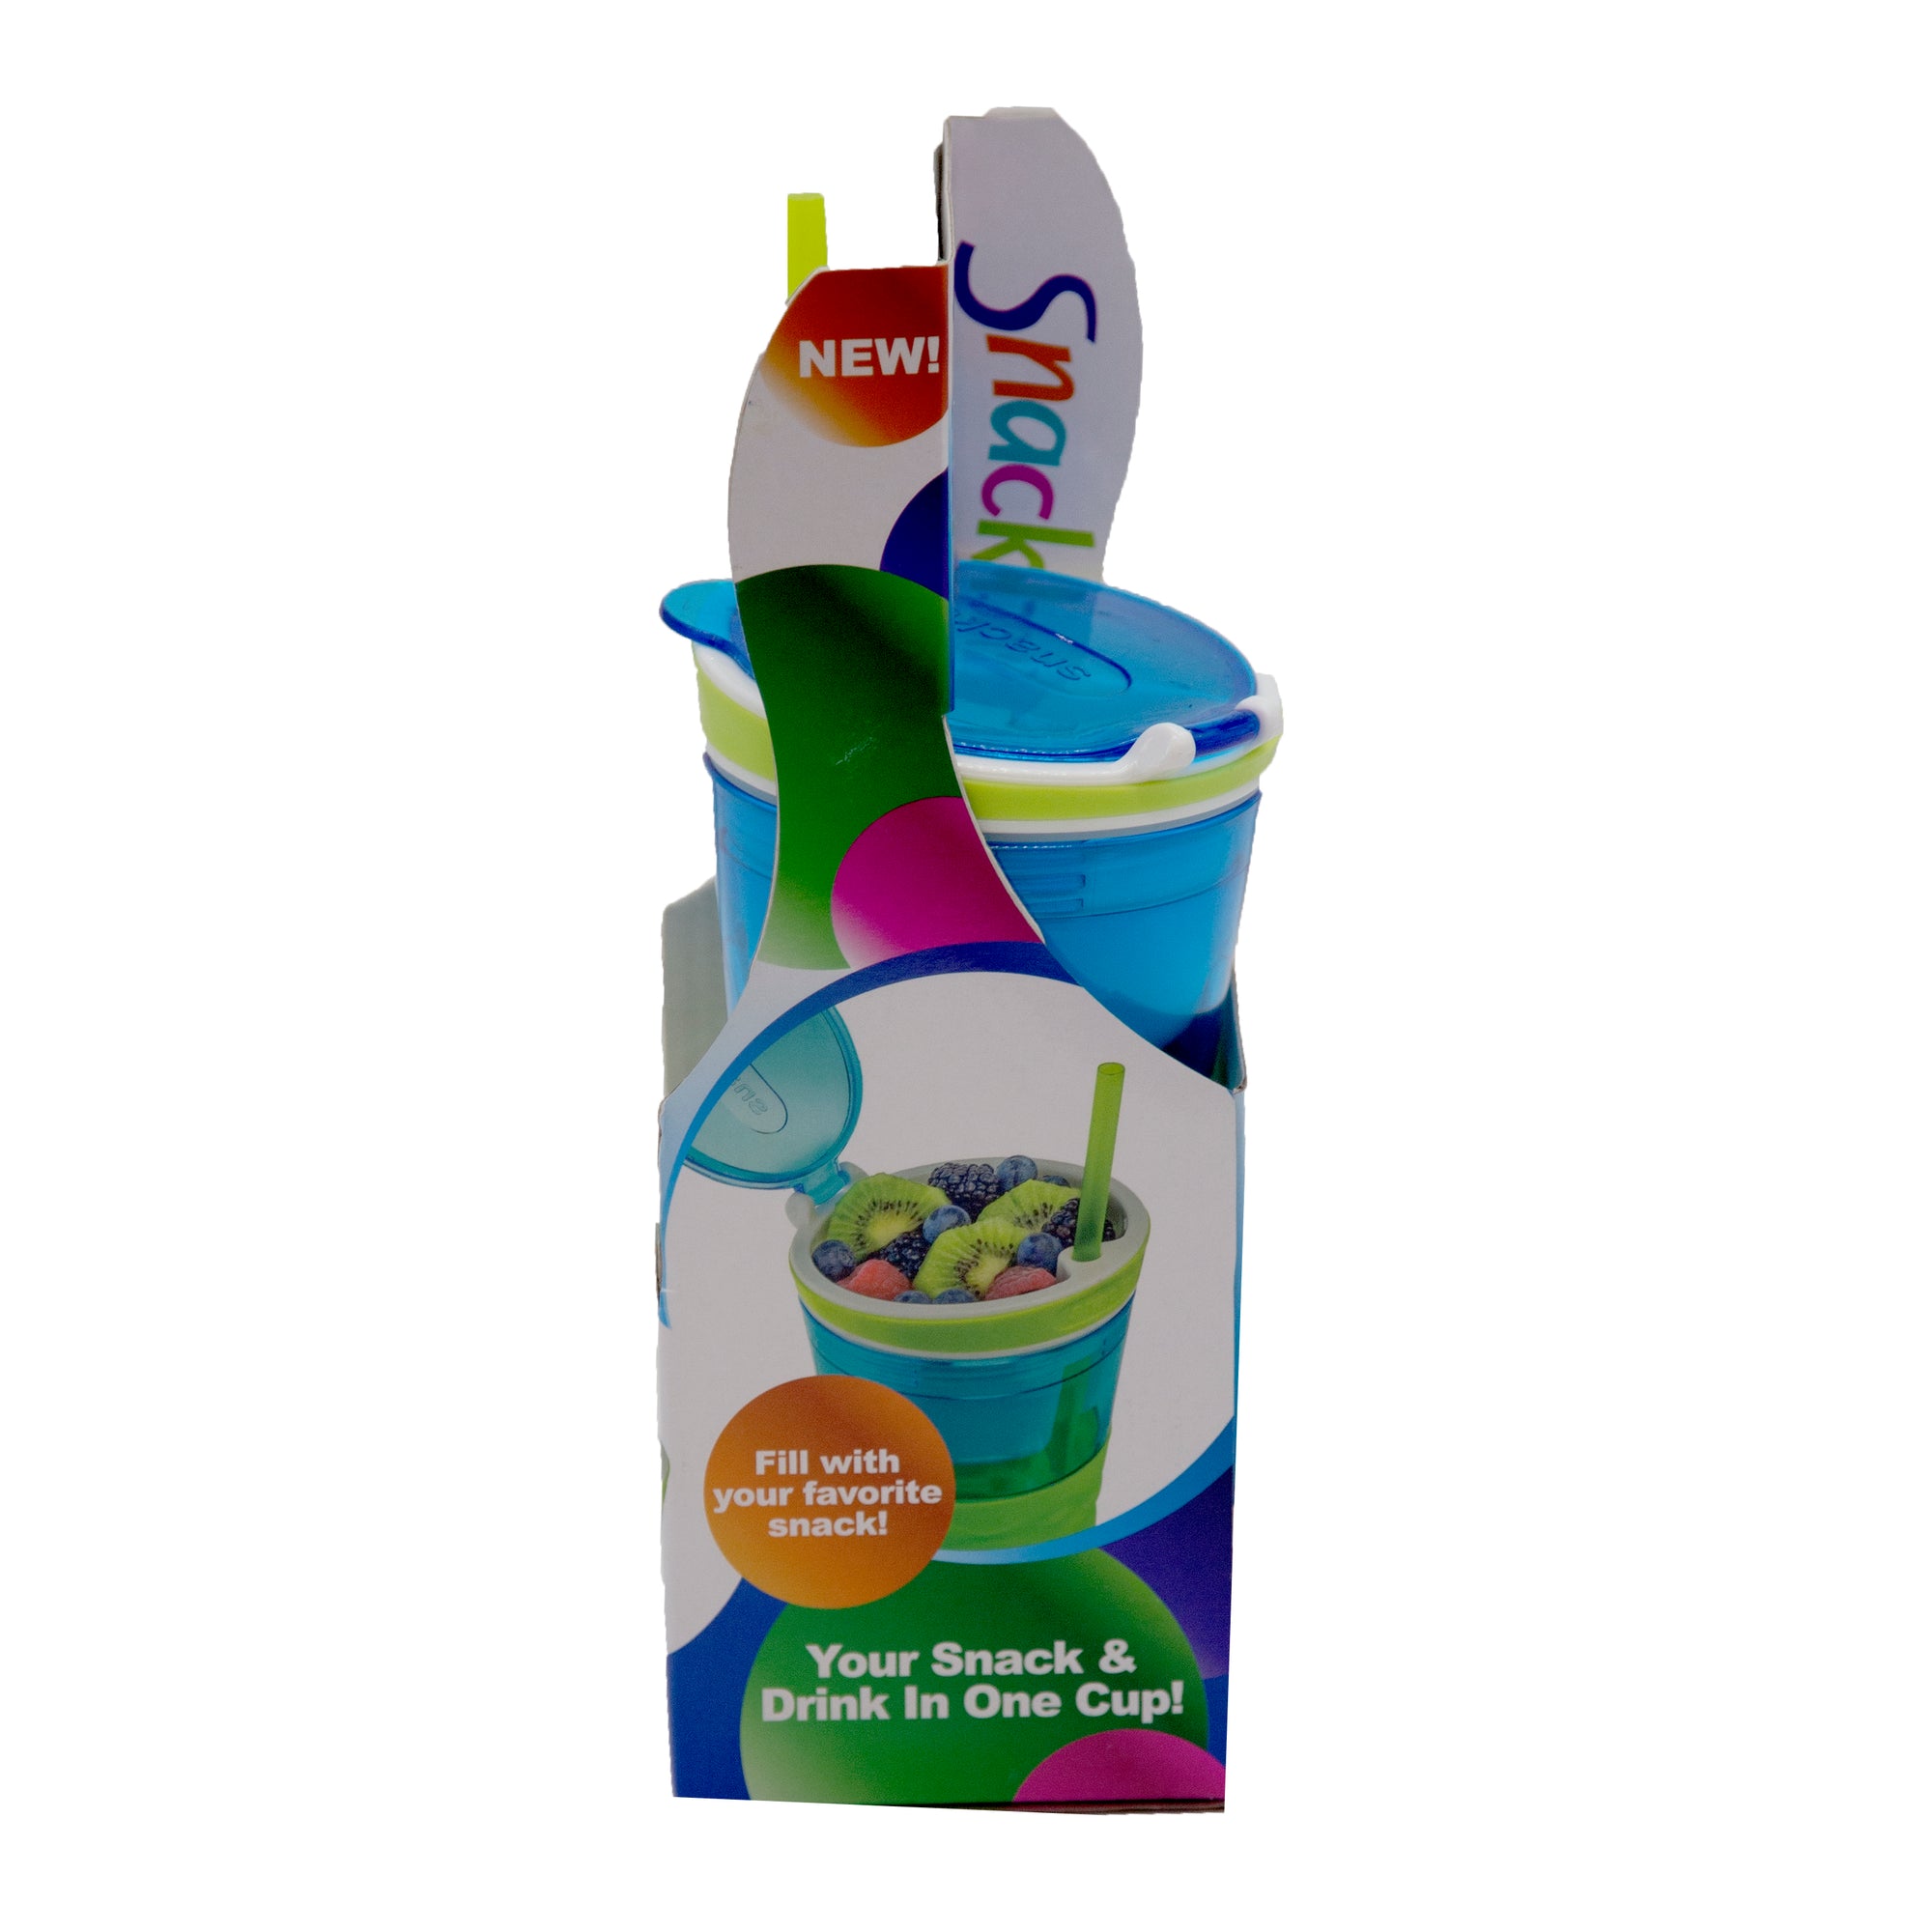  Snackeez Travel Cup Snack and Drink in One Container Green/Blue  : Home & Kitchen